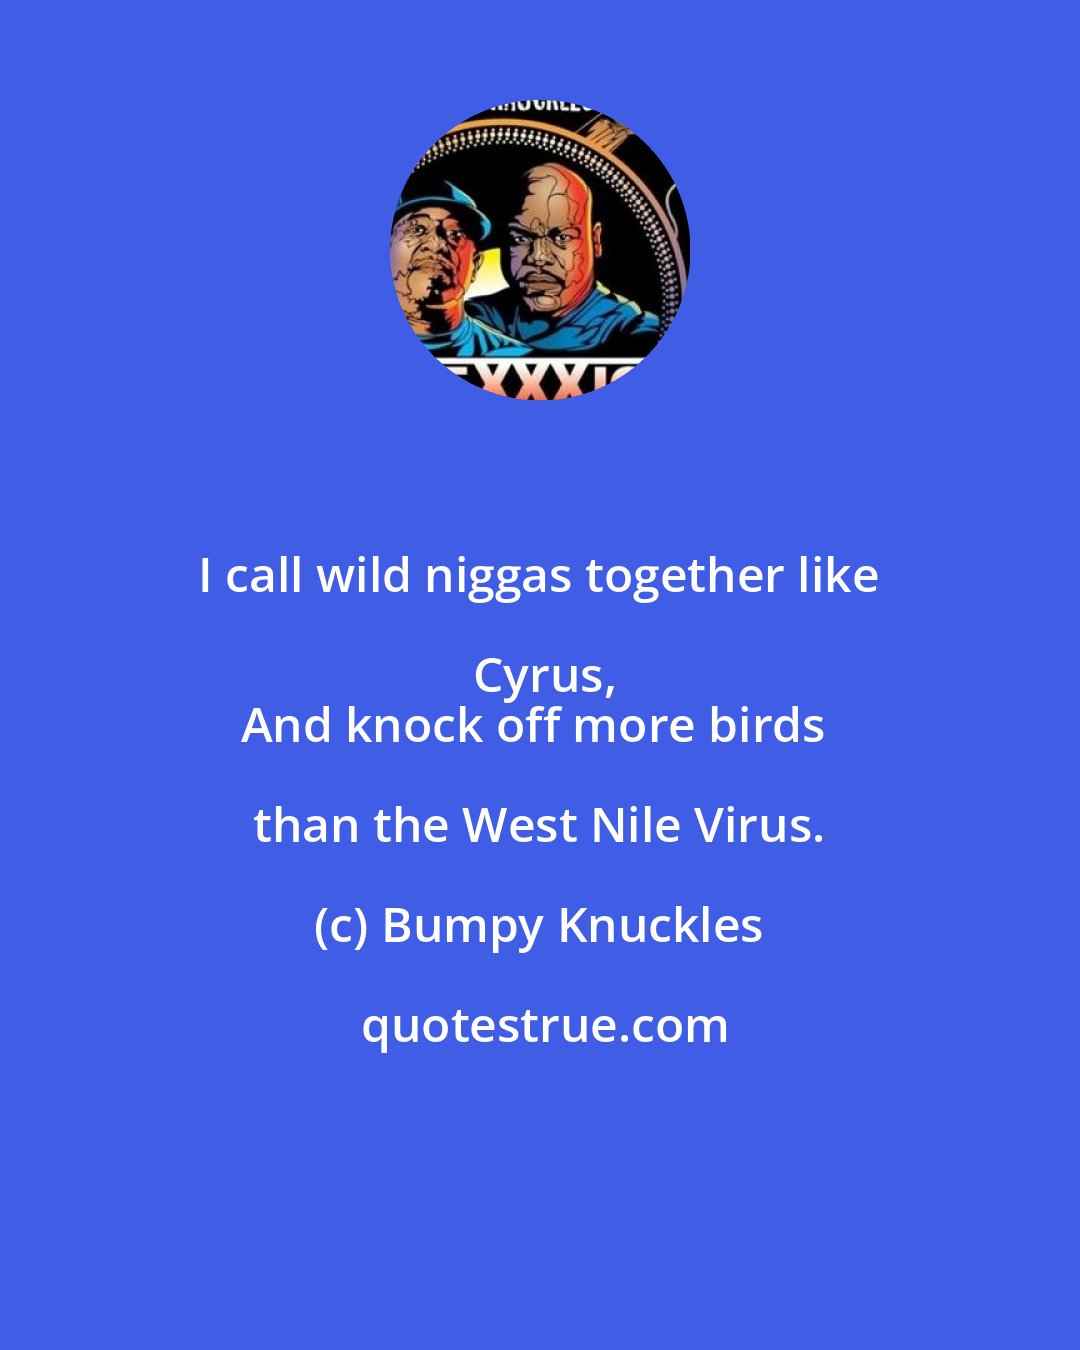 Bumpy Knuckles: I call wild niggas together like Cyrus,
And knock off more birds than the West Nile Virus.